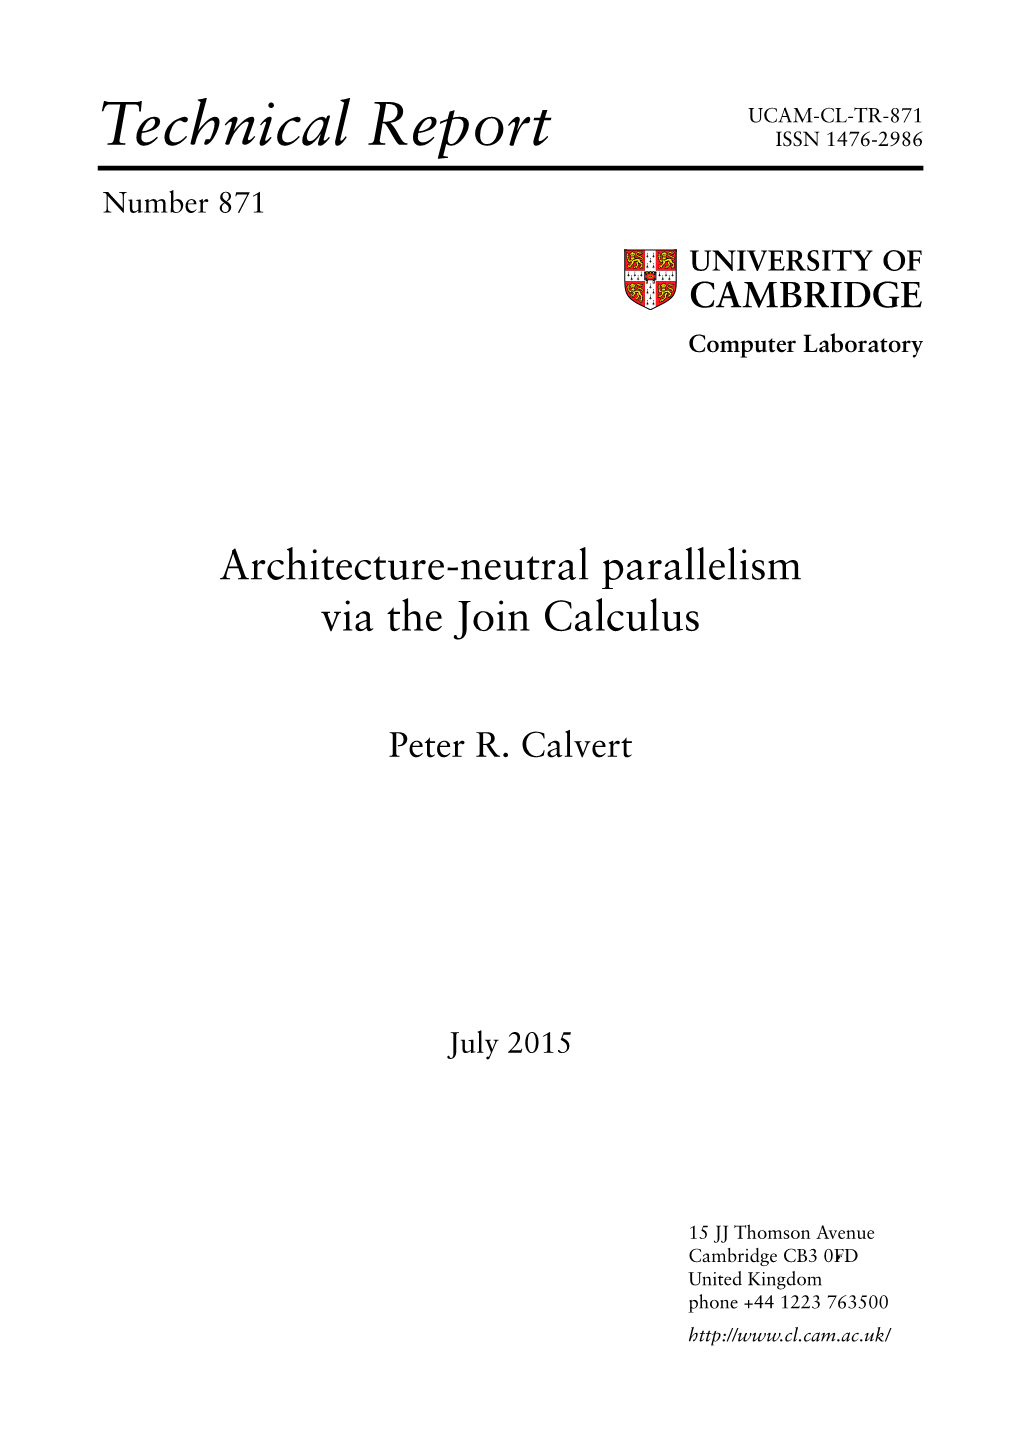 Architecture-Neutral Parallelism Via the Join Calculus